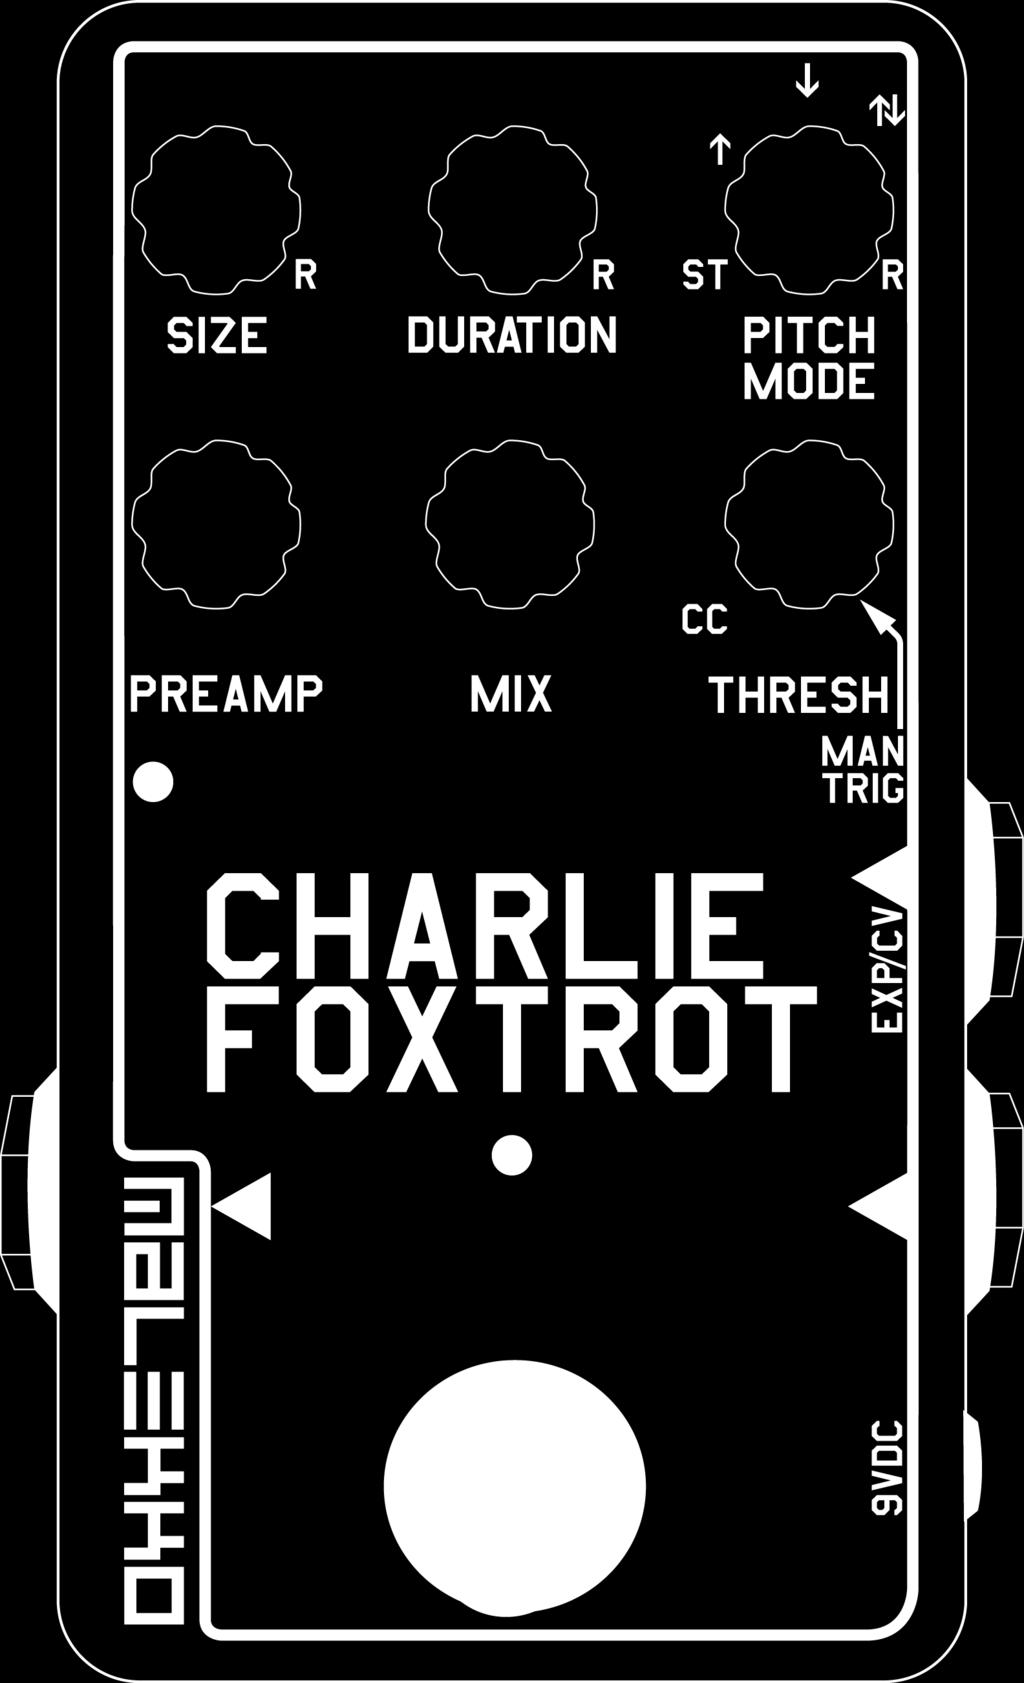 Charlie Foxtrot is a digital buffer/granular pedal with both autocapture and manual-capture of the input signal.